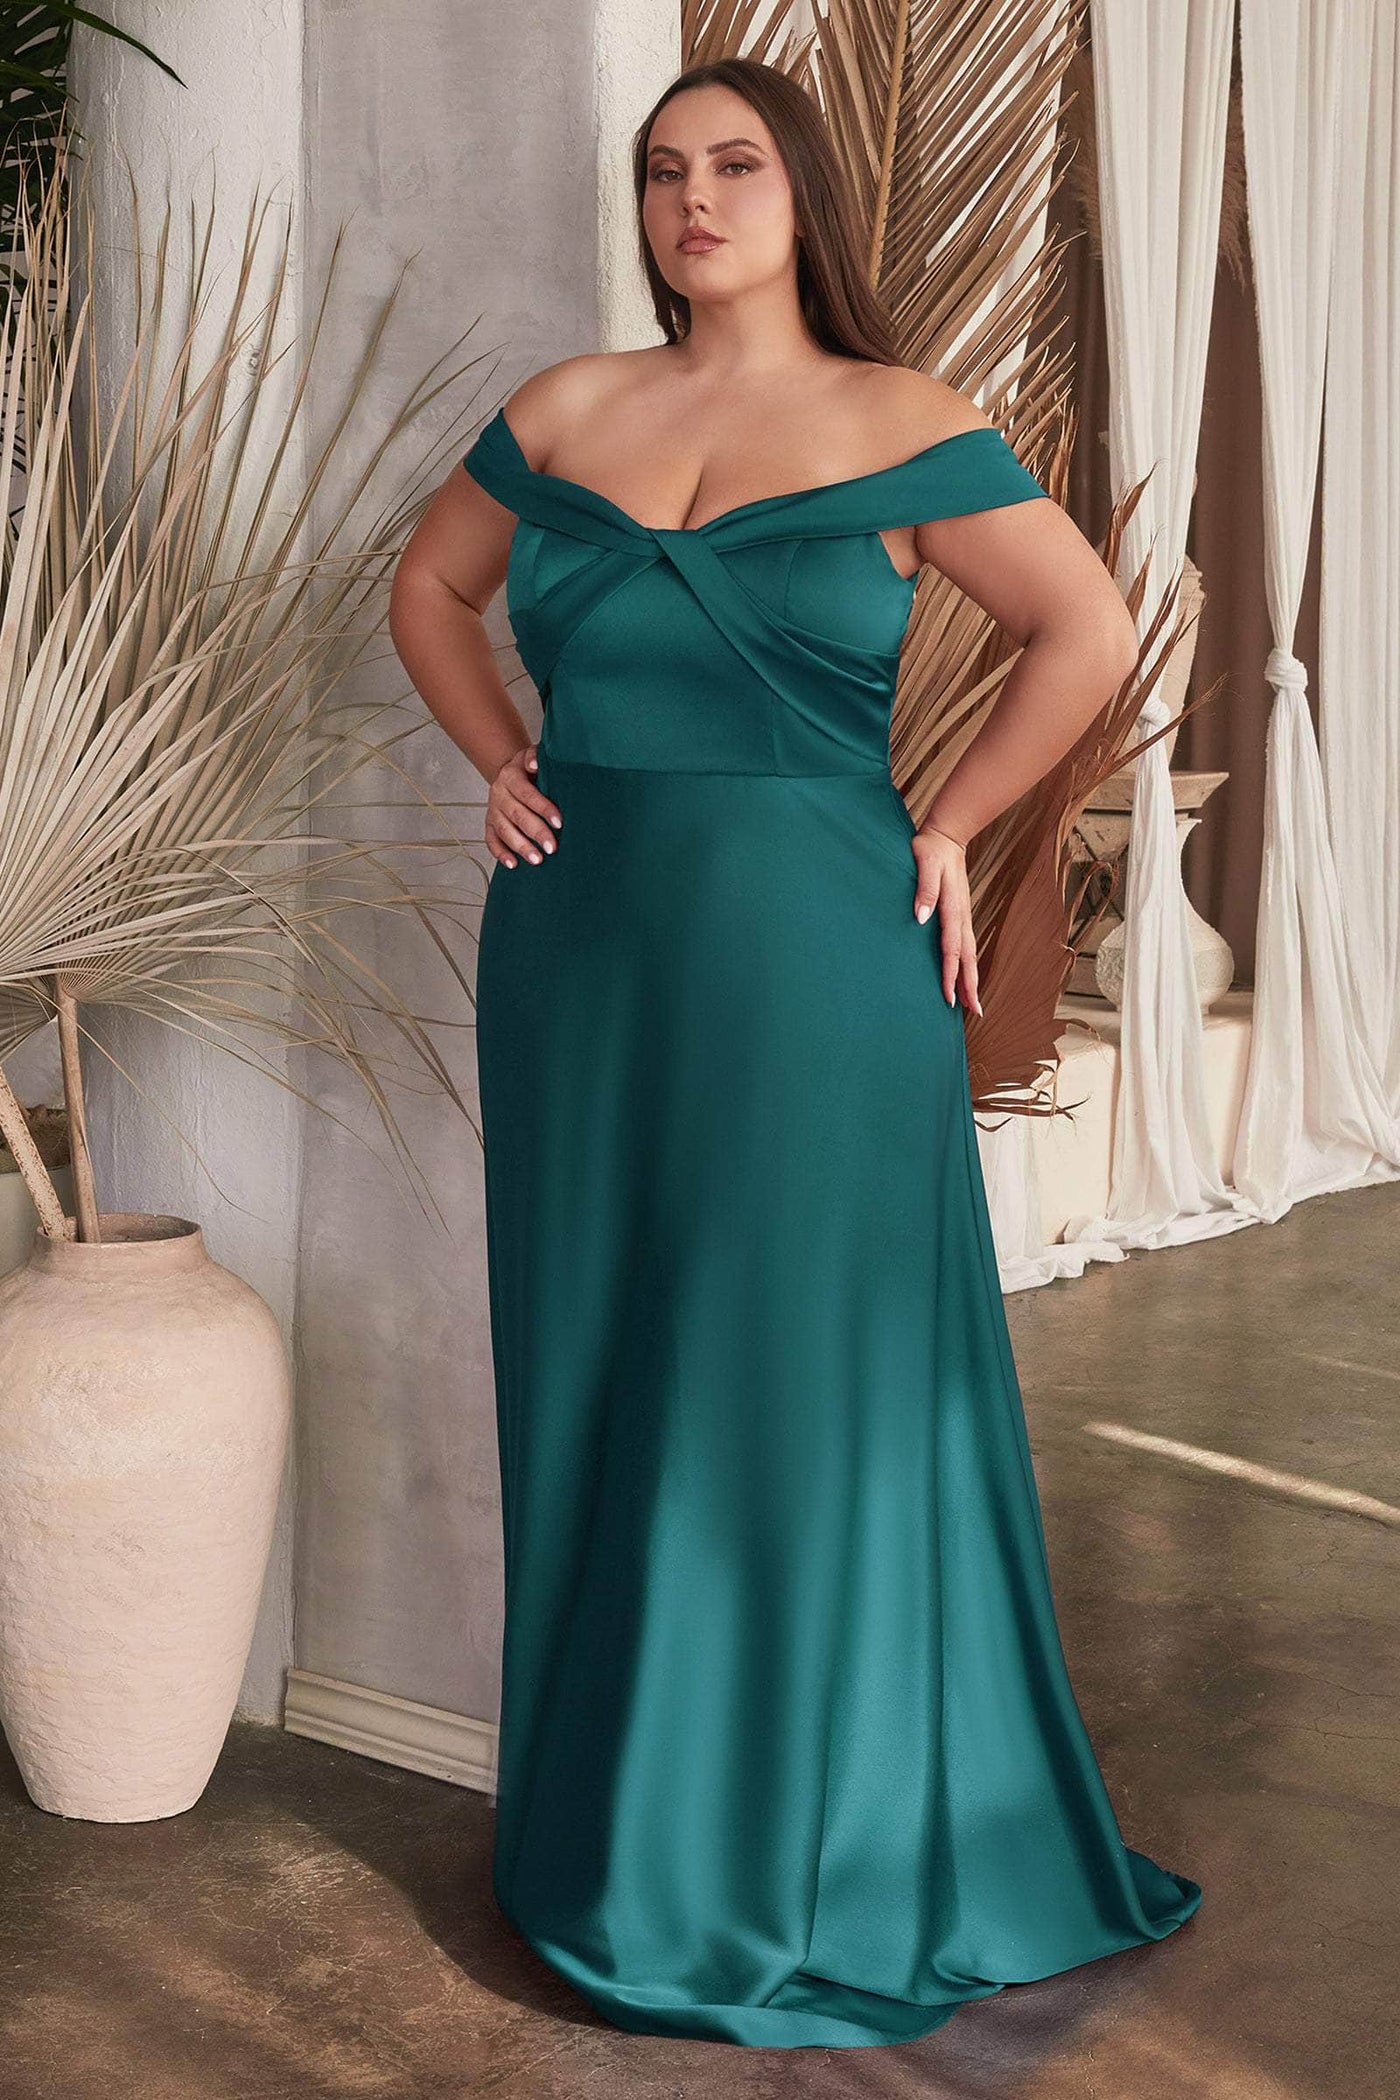 Ladivine CD325 - Cap Sleeve A-Line Prom Gown Special Occasion Dress